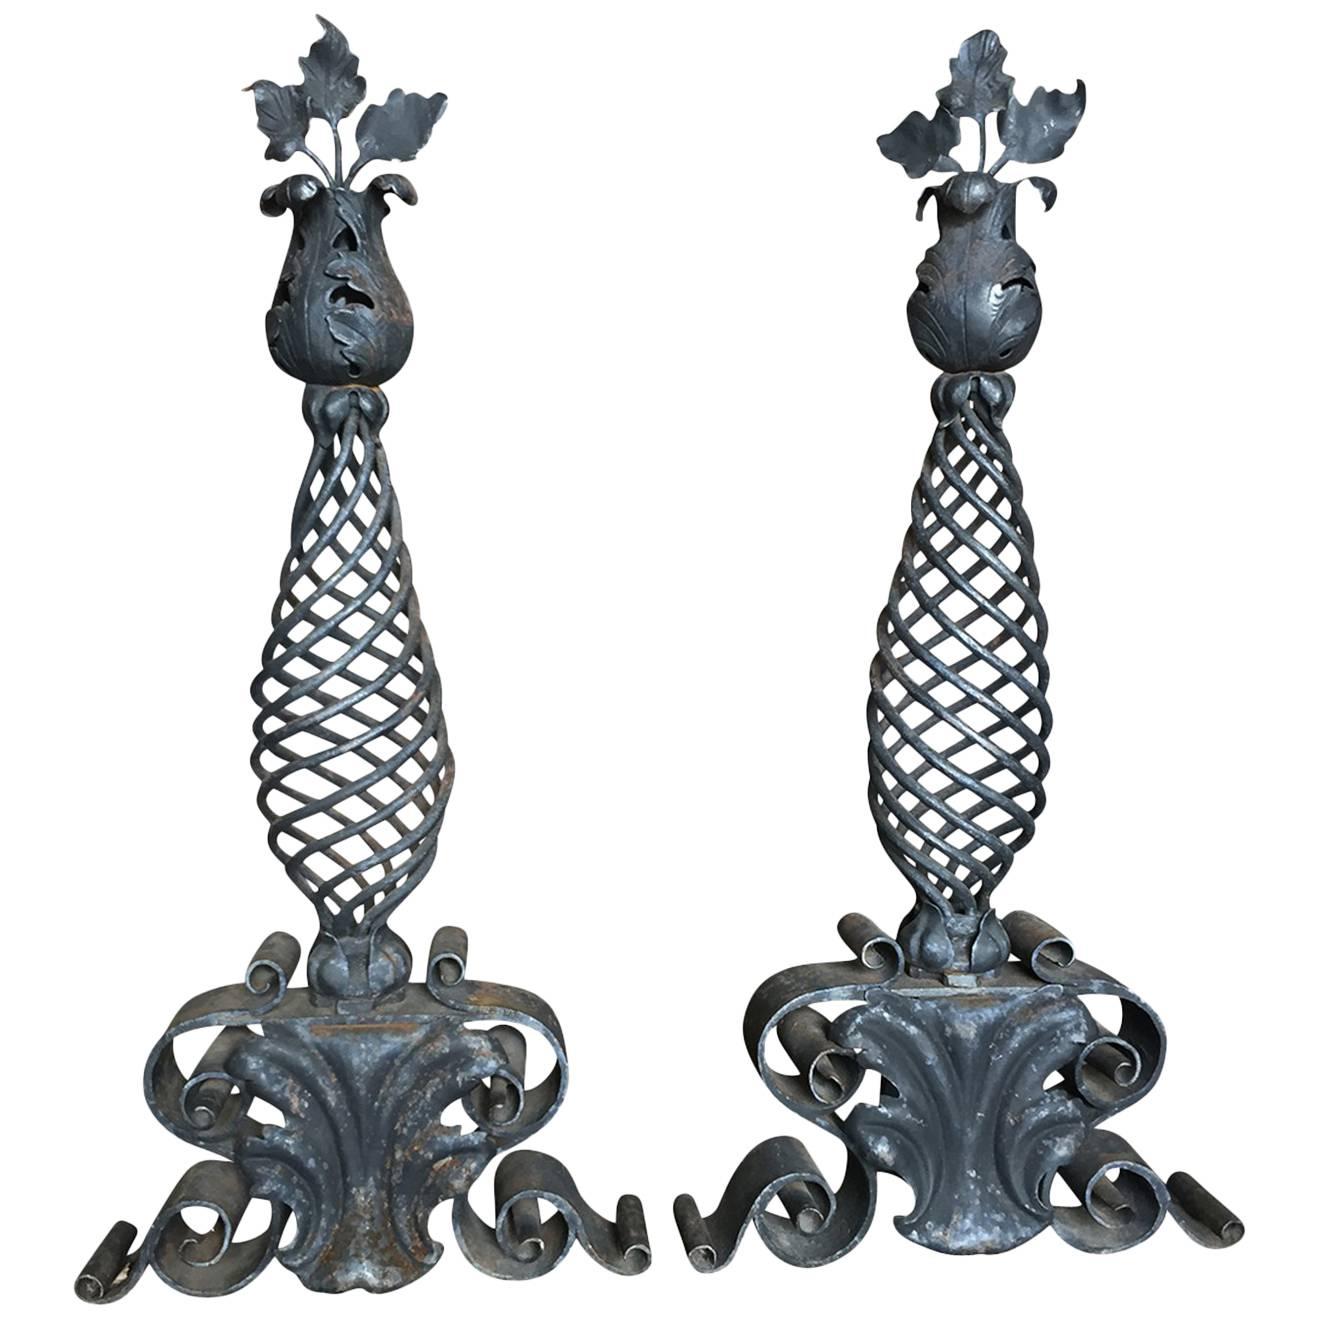 Late 19th Century to Early 20th Century Pair of Iron Andirons